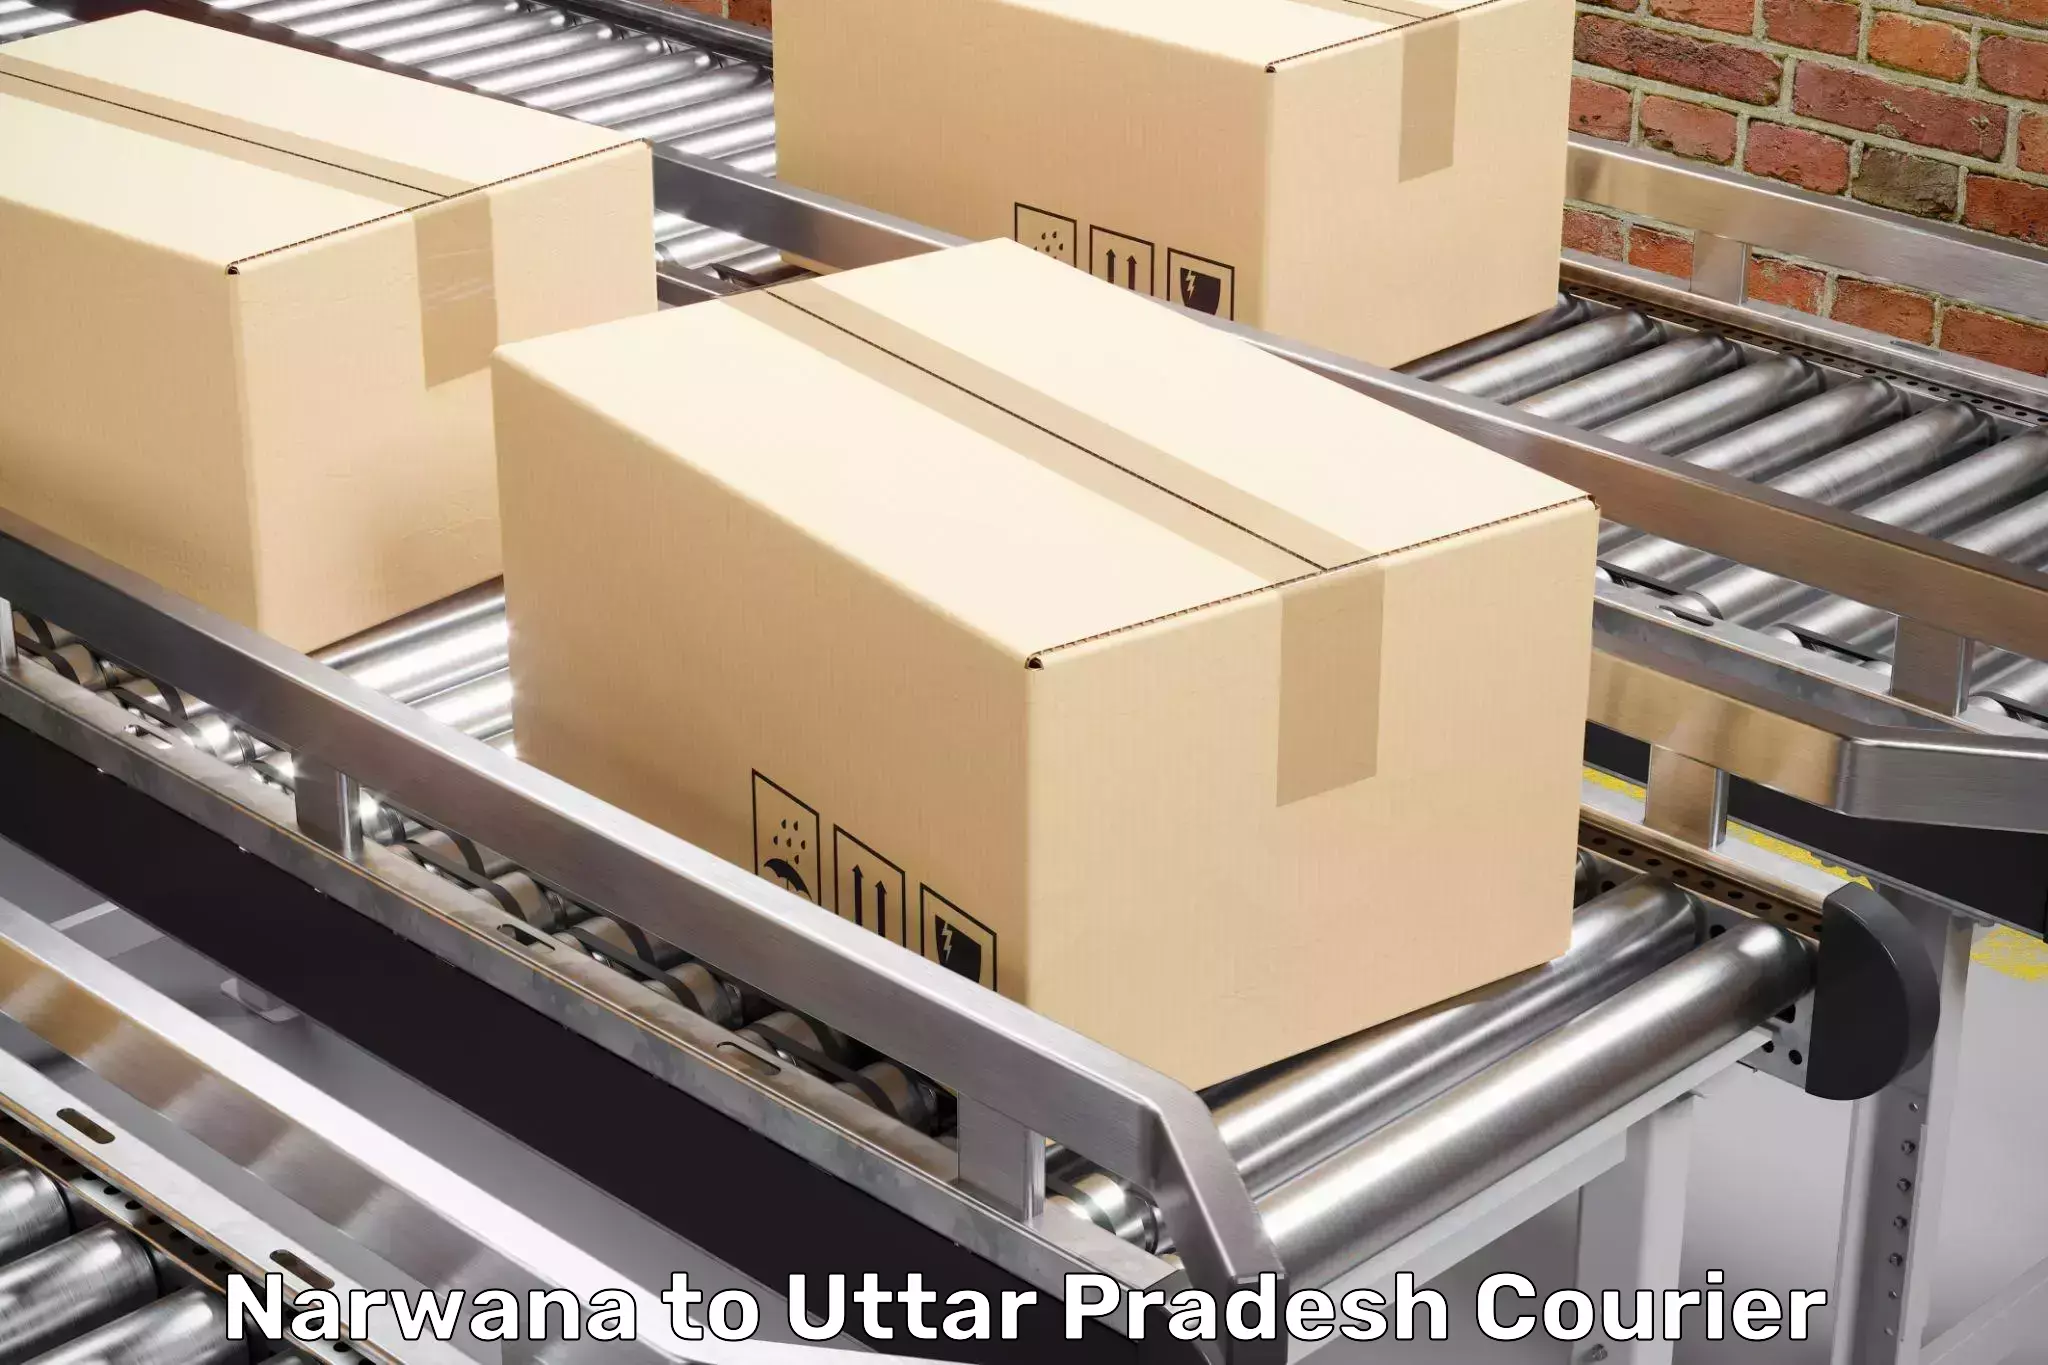 Reliable moving assistance Narwana to Kanpur